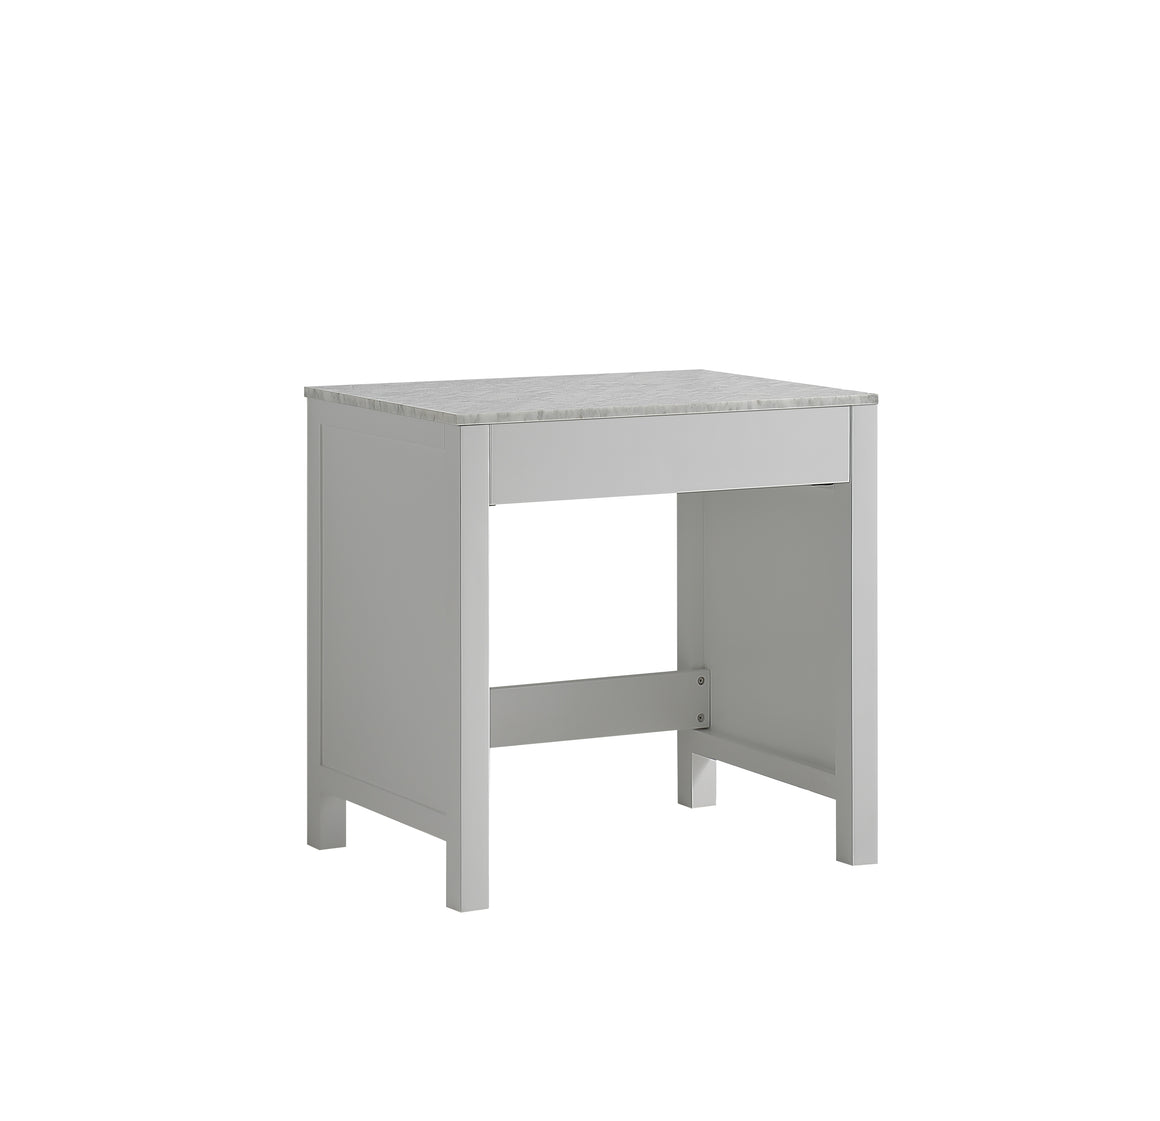 Jacques 30" Single Make-Up Table in White, White Carrera Marble Top